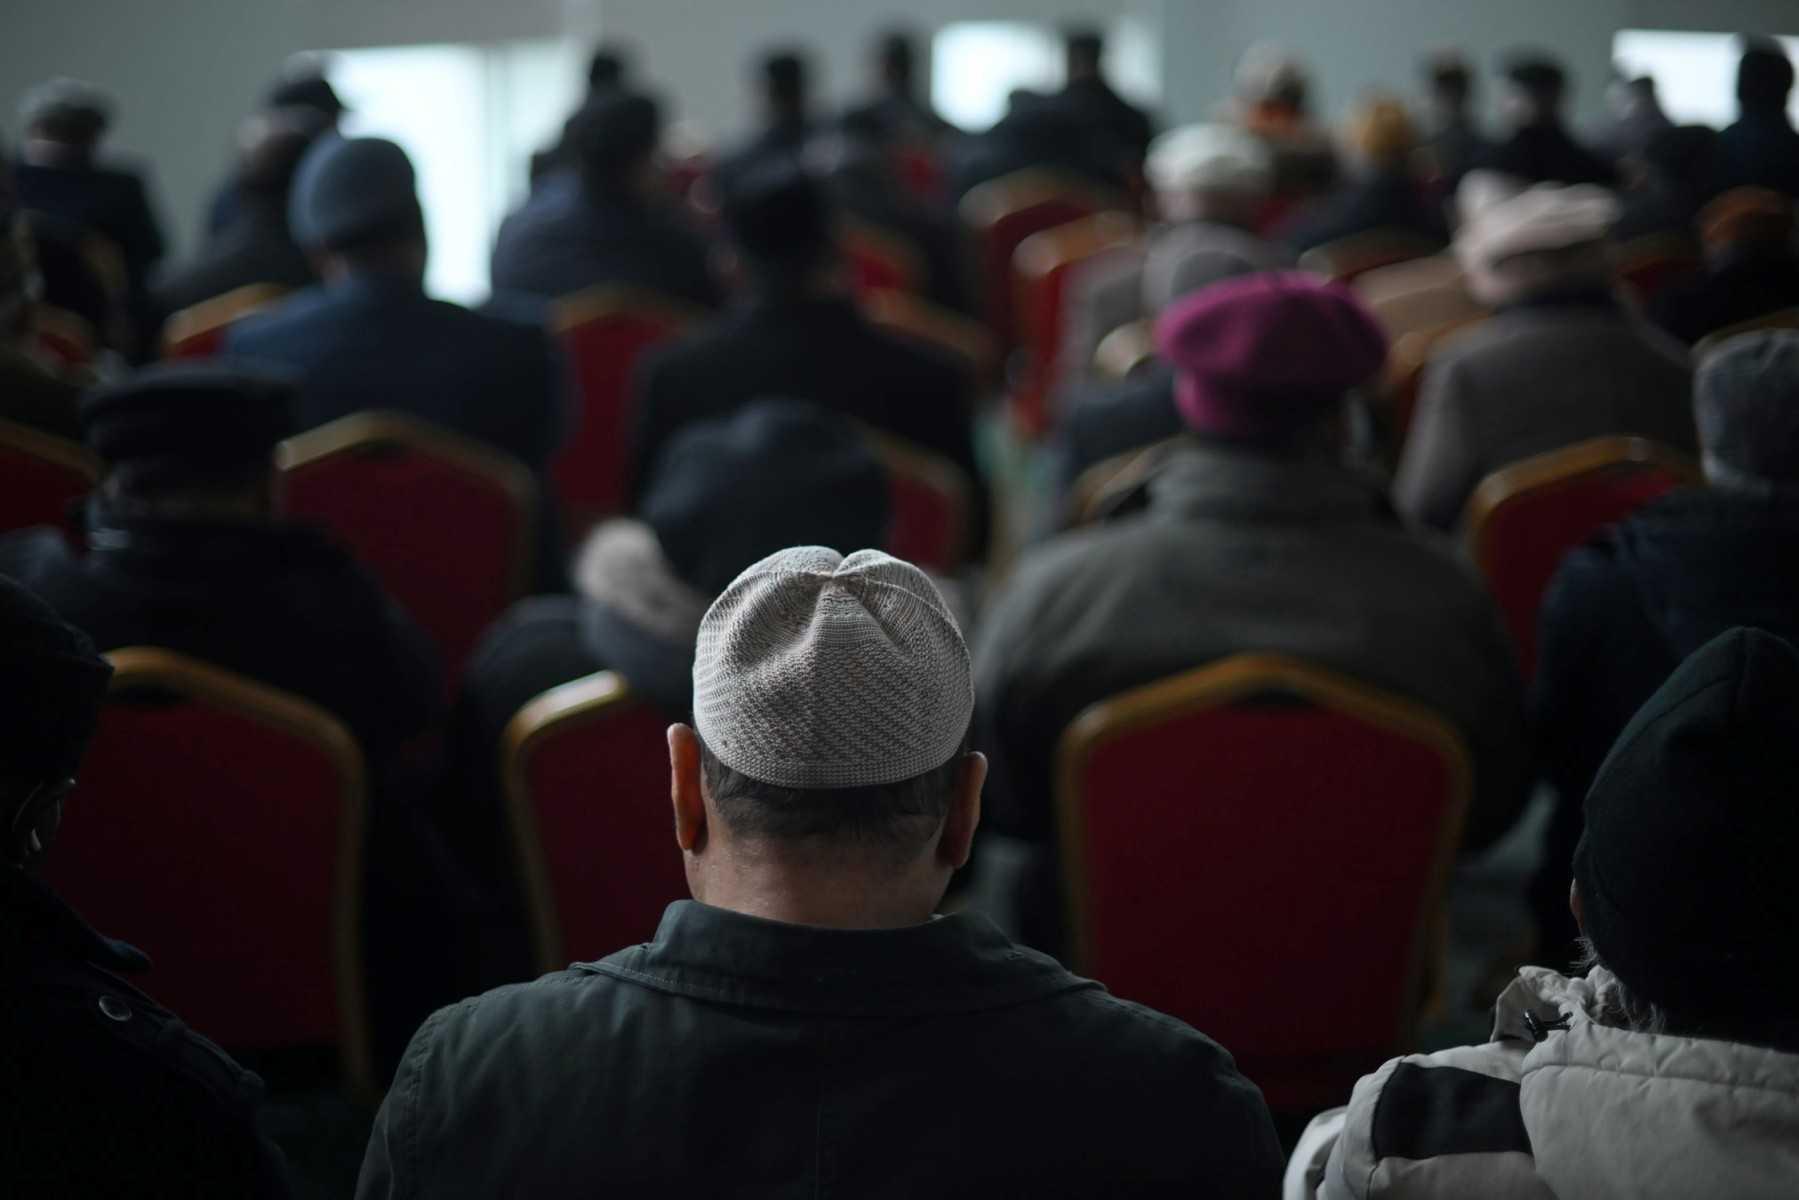 Muslims attend a service at a mosque in southwest London on March 3. Photo: AFP